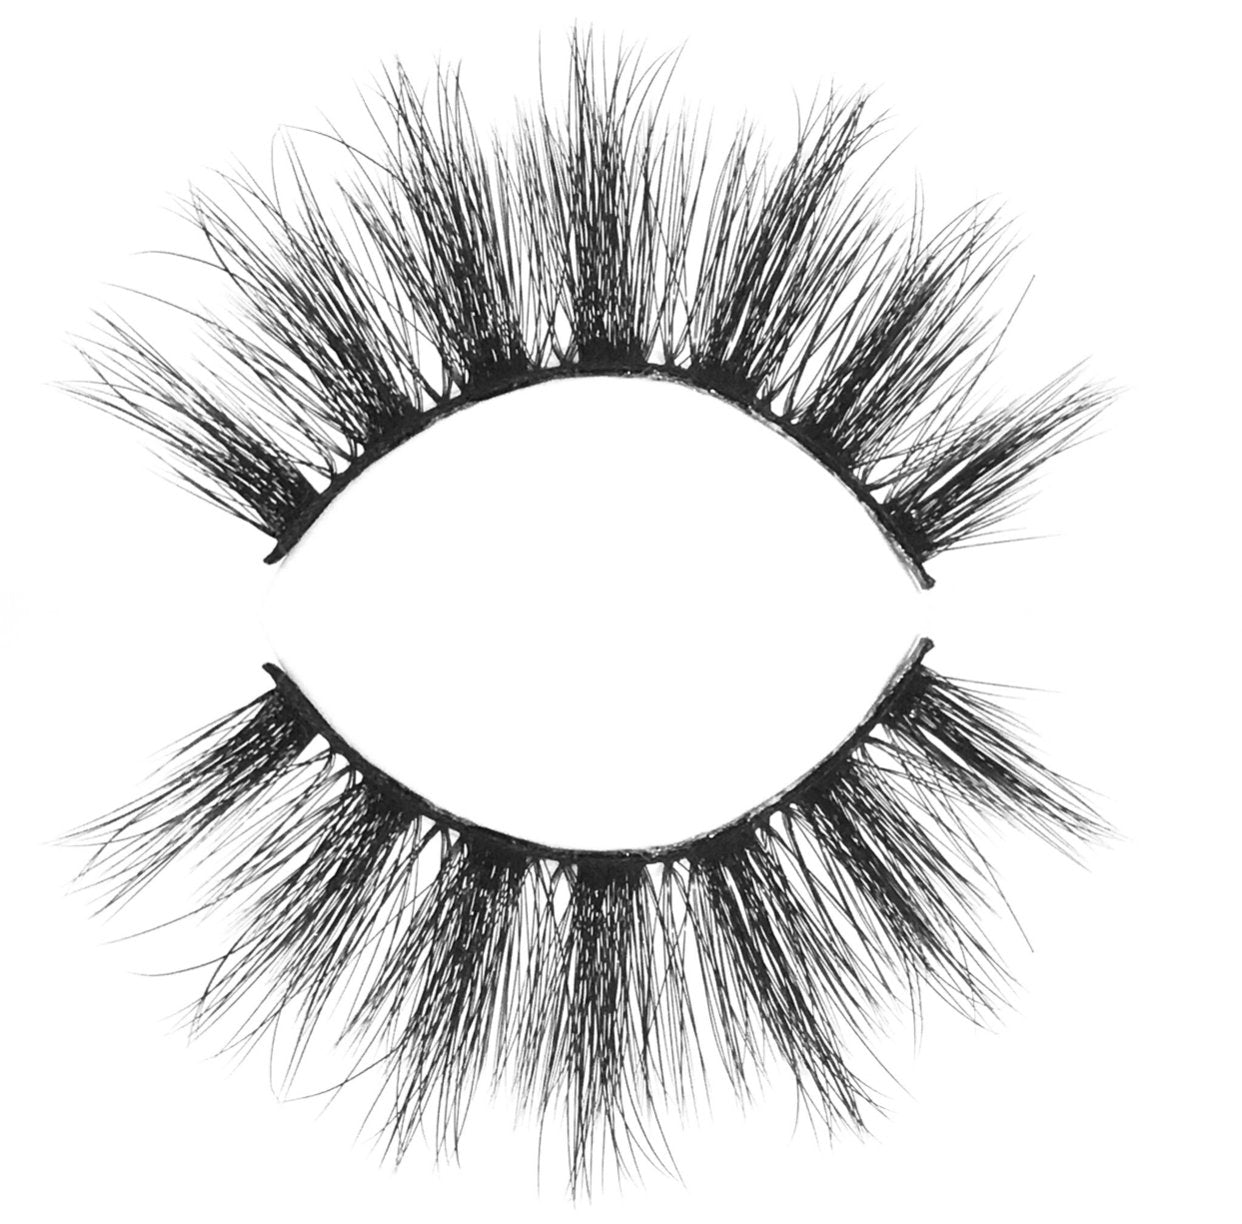 Luxe | 5 Pairs | Lash Pack